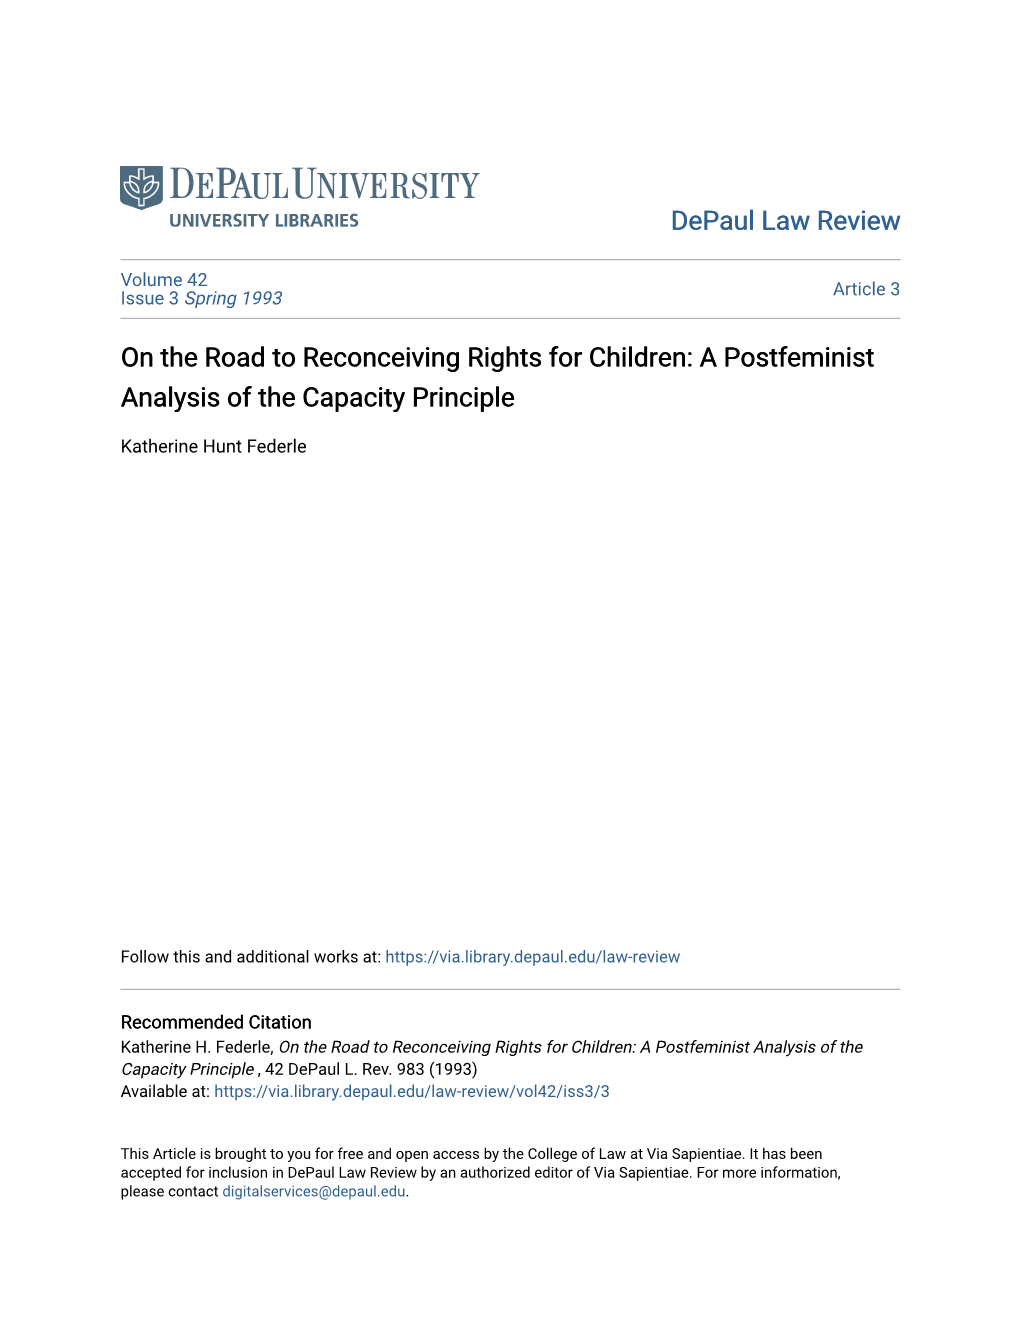 On the Road to Reconceiving Rights for Children: a Postfeminist Analysis of the Capacity Principle